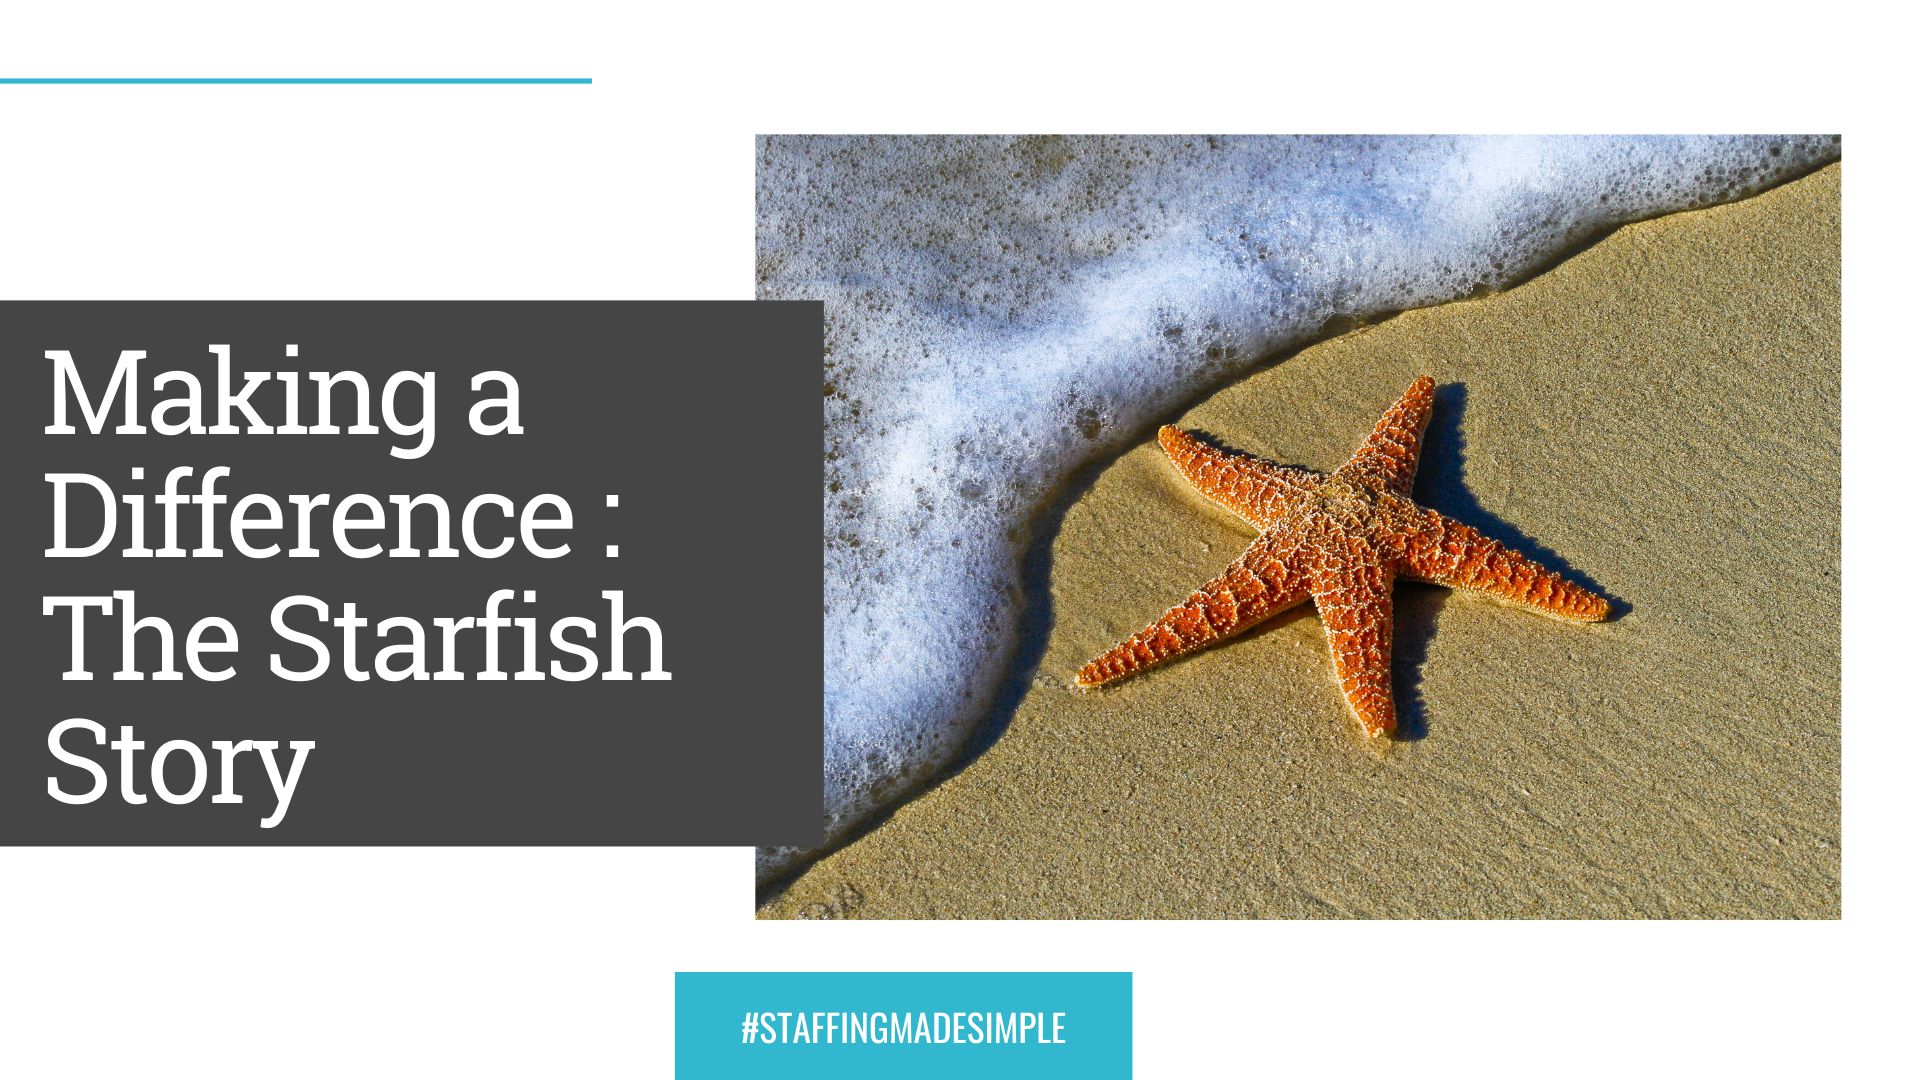 Making a Difference for Cincinnati & Dayton Job Seekers: The Starfish Story